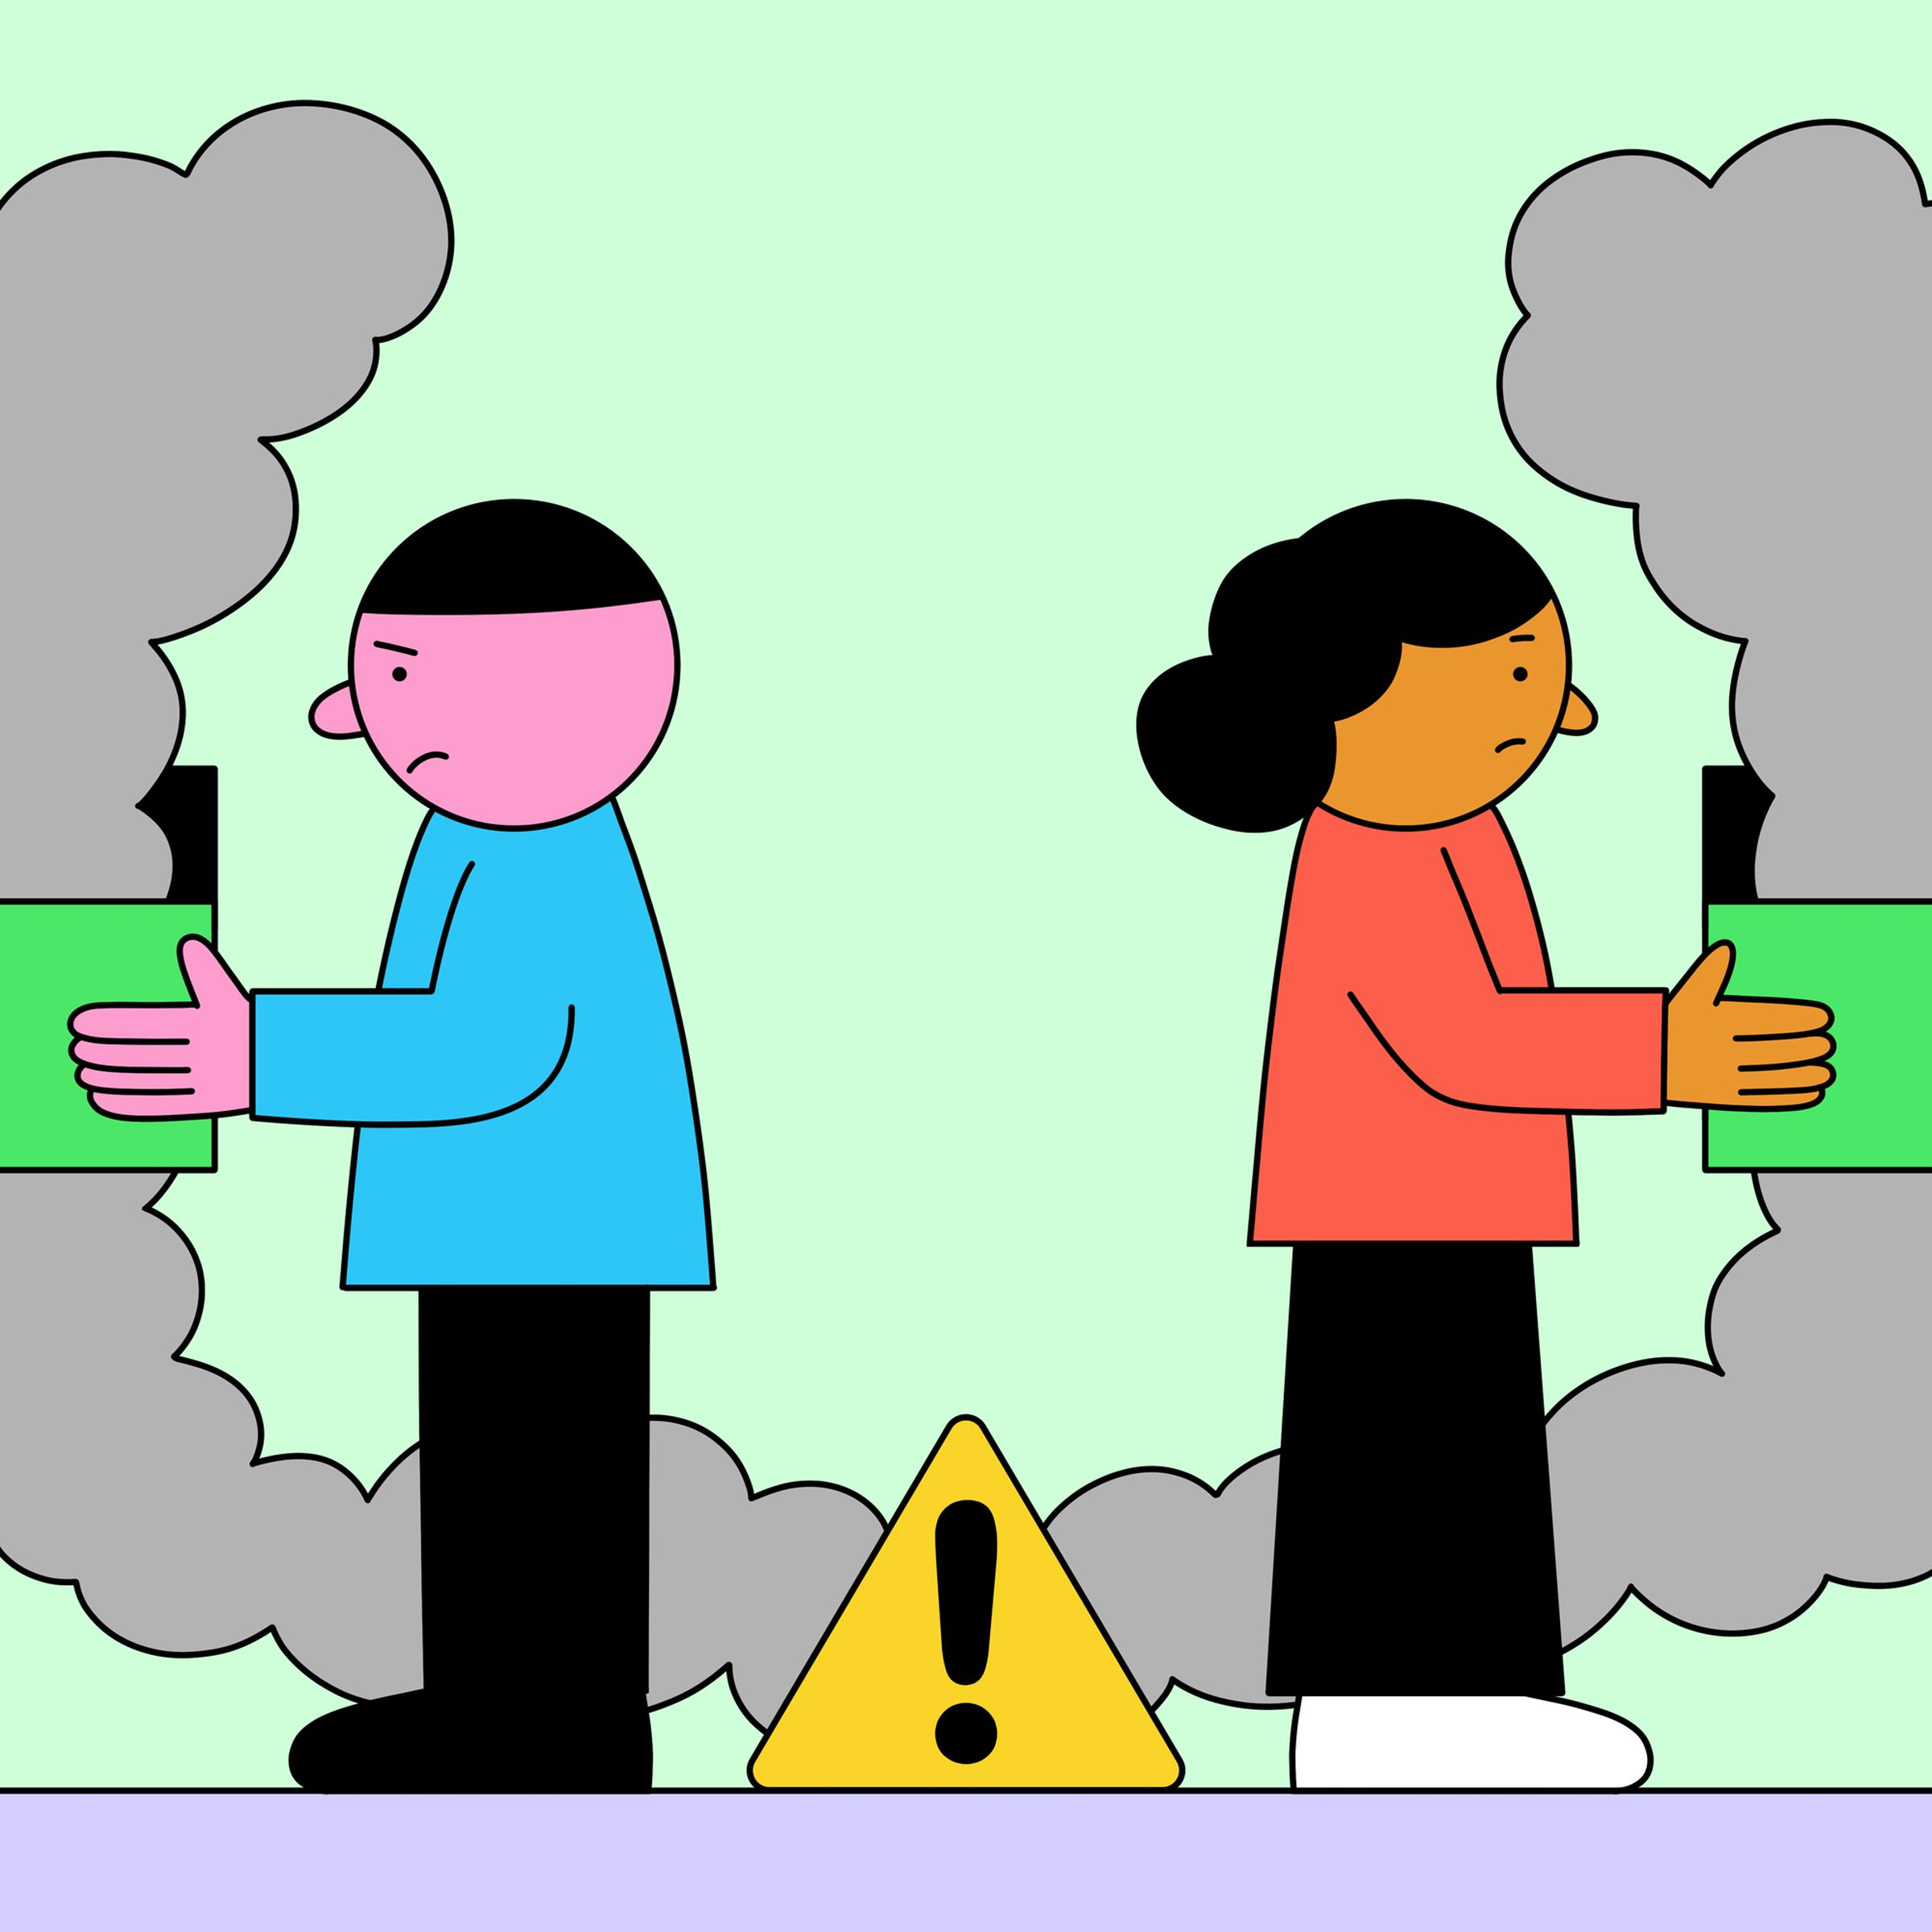 Two cartoon figures face away from each other holding matching boxes emitting smoke, which comes from a common source behind them.